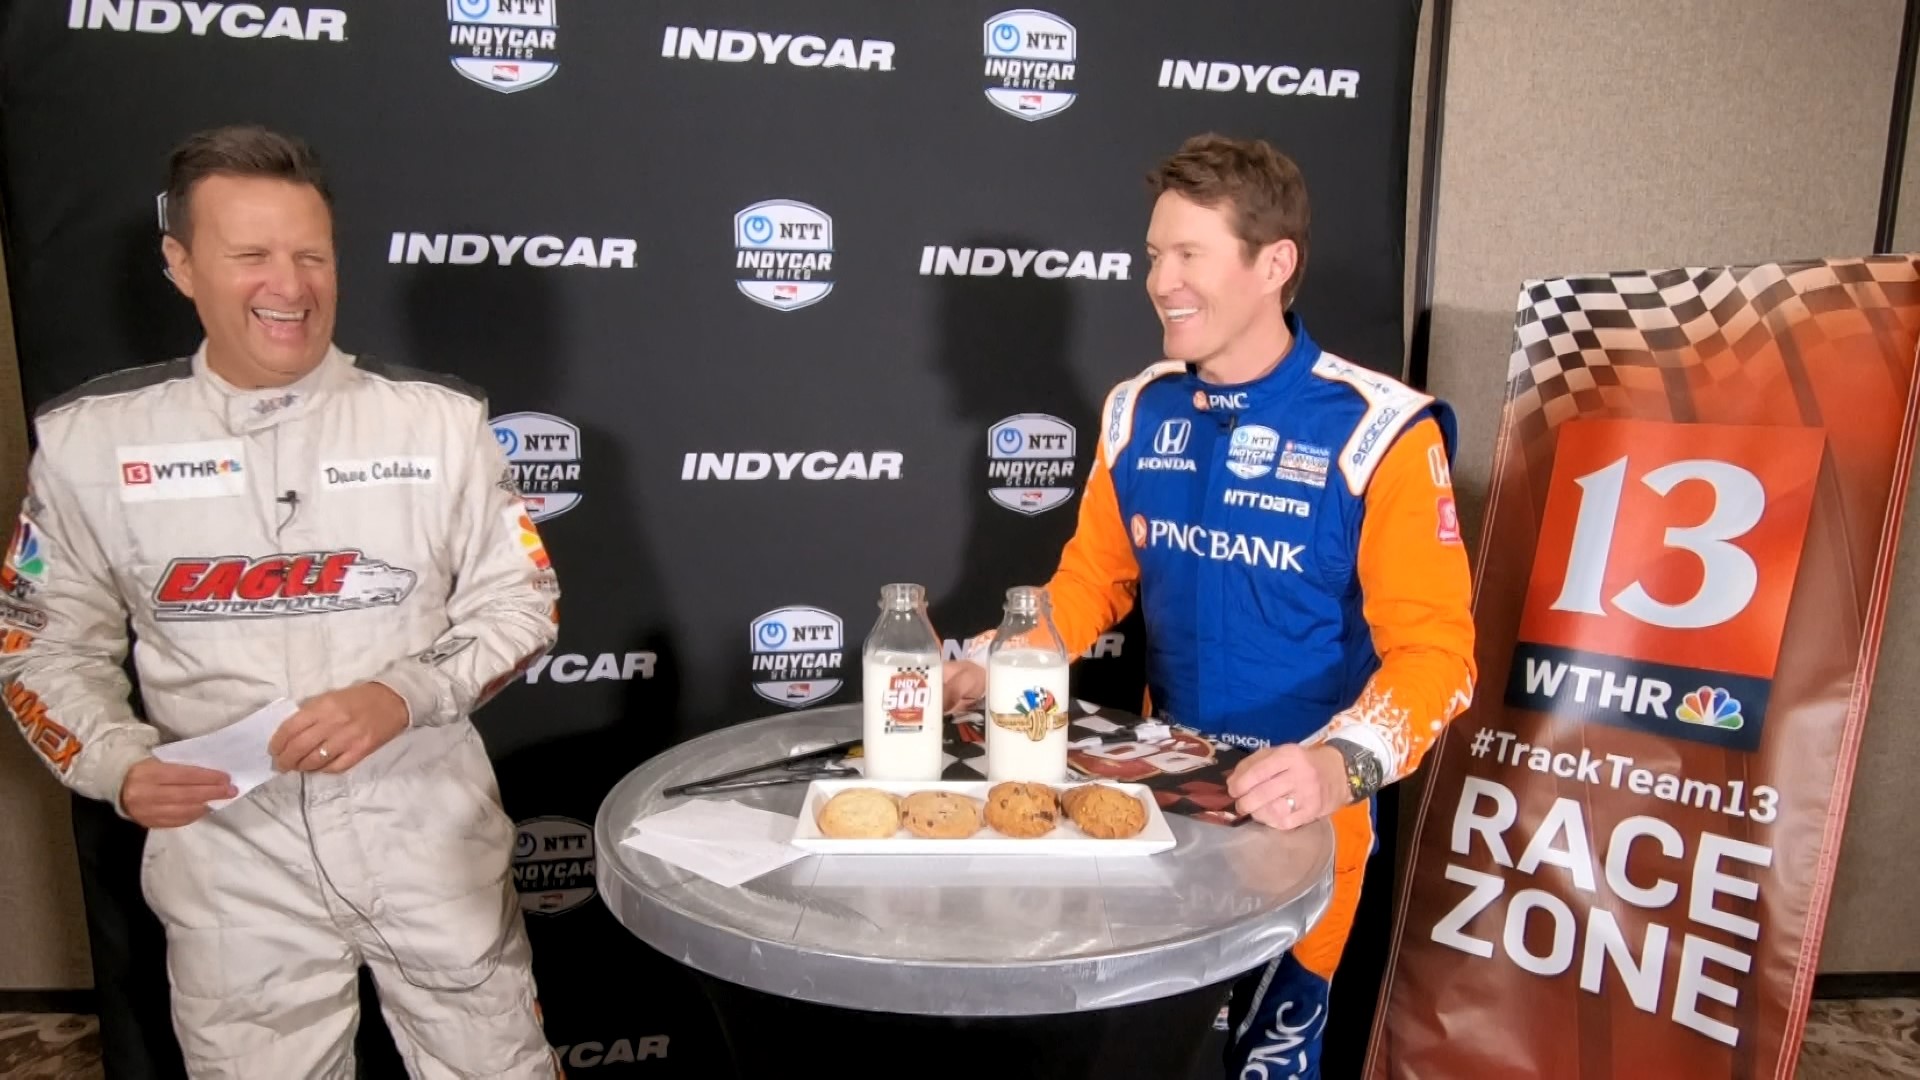 Dave Calabro went to Austin, Texas before the pandemic hit to talk with IndyCar drivers over milk and cookies.